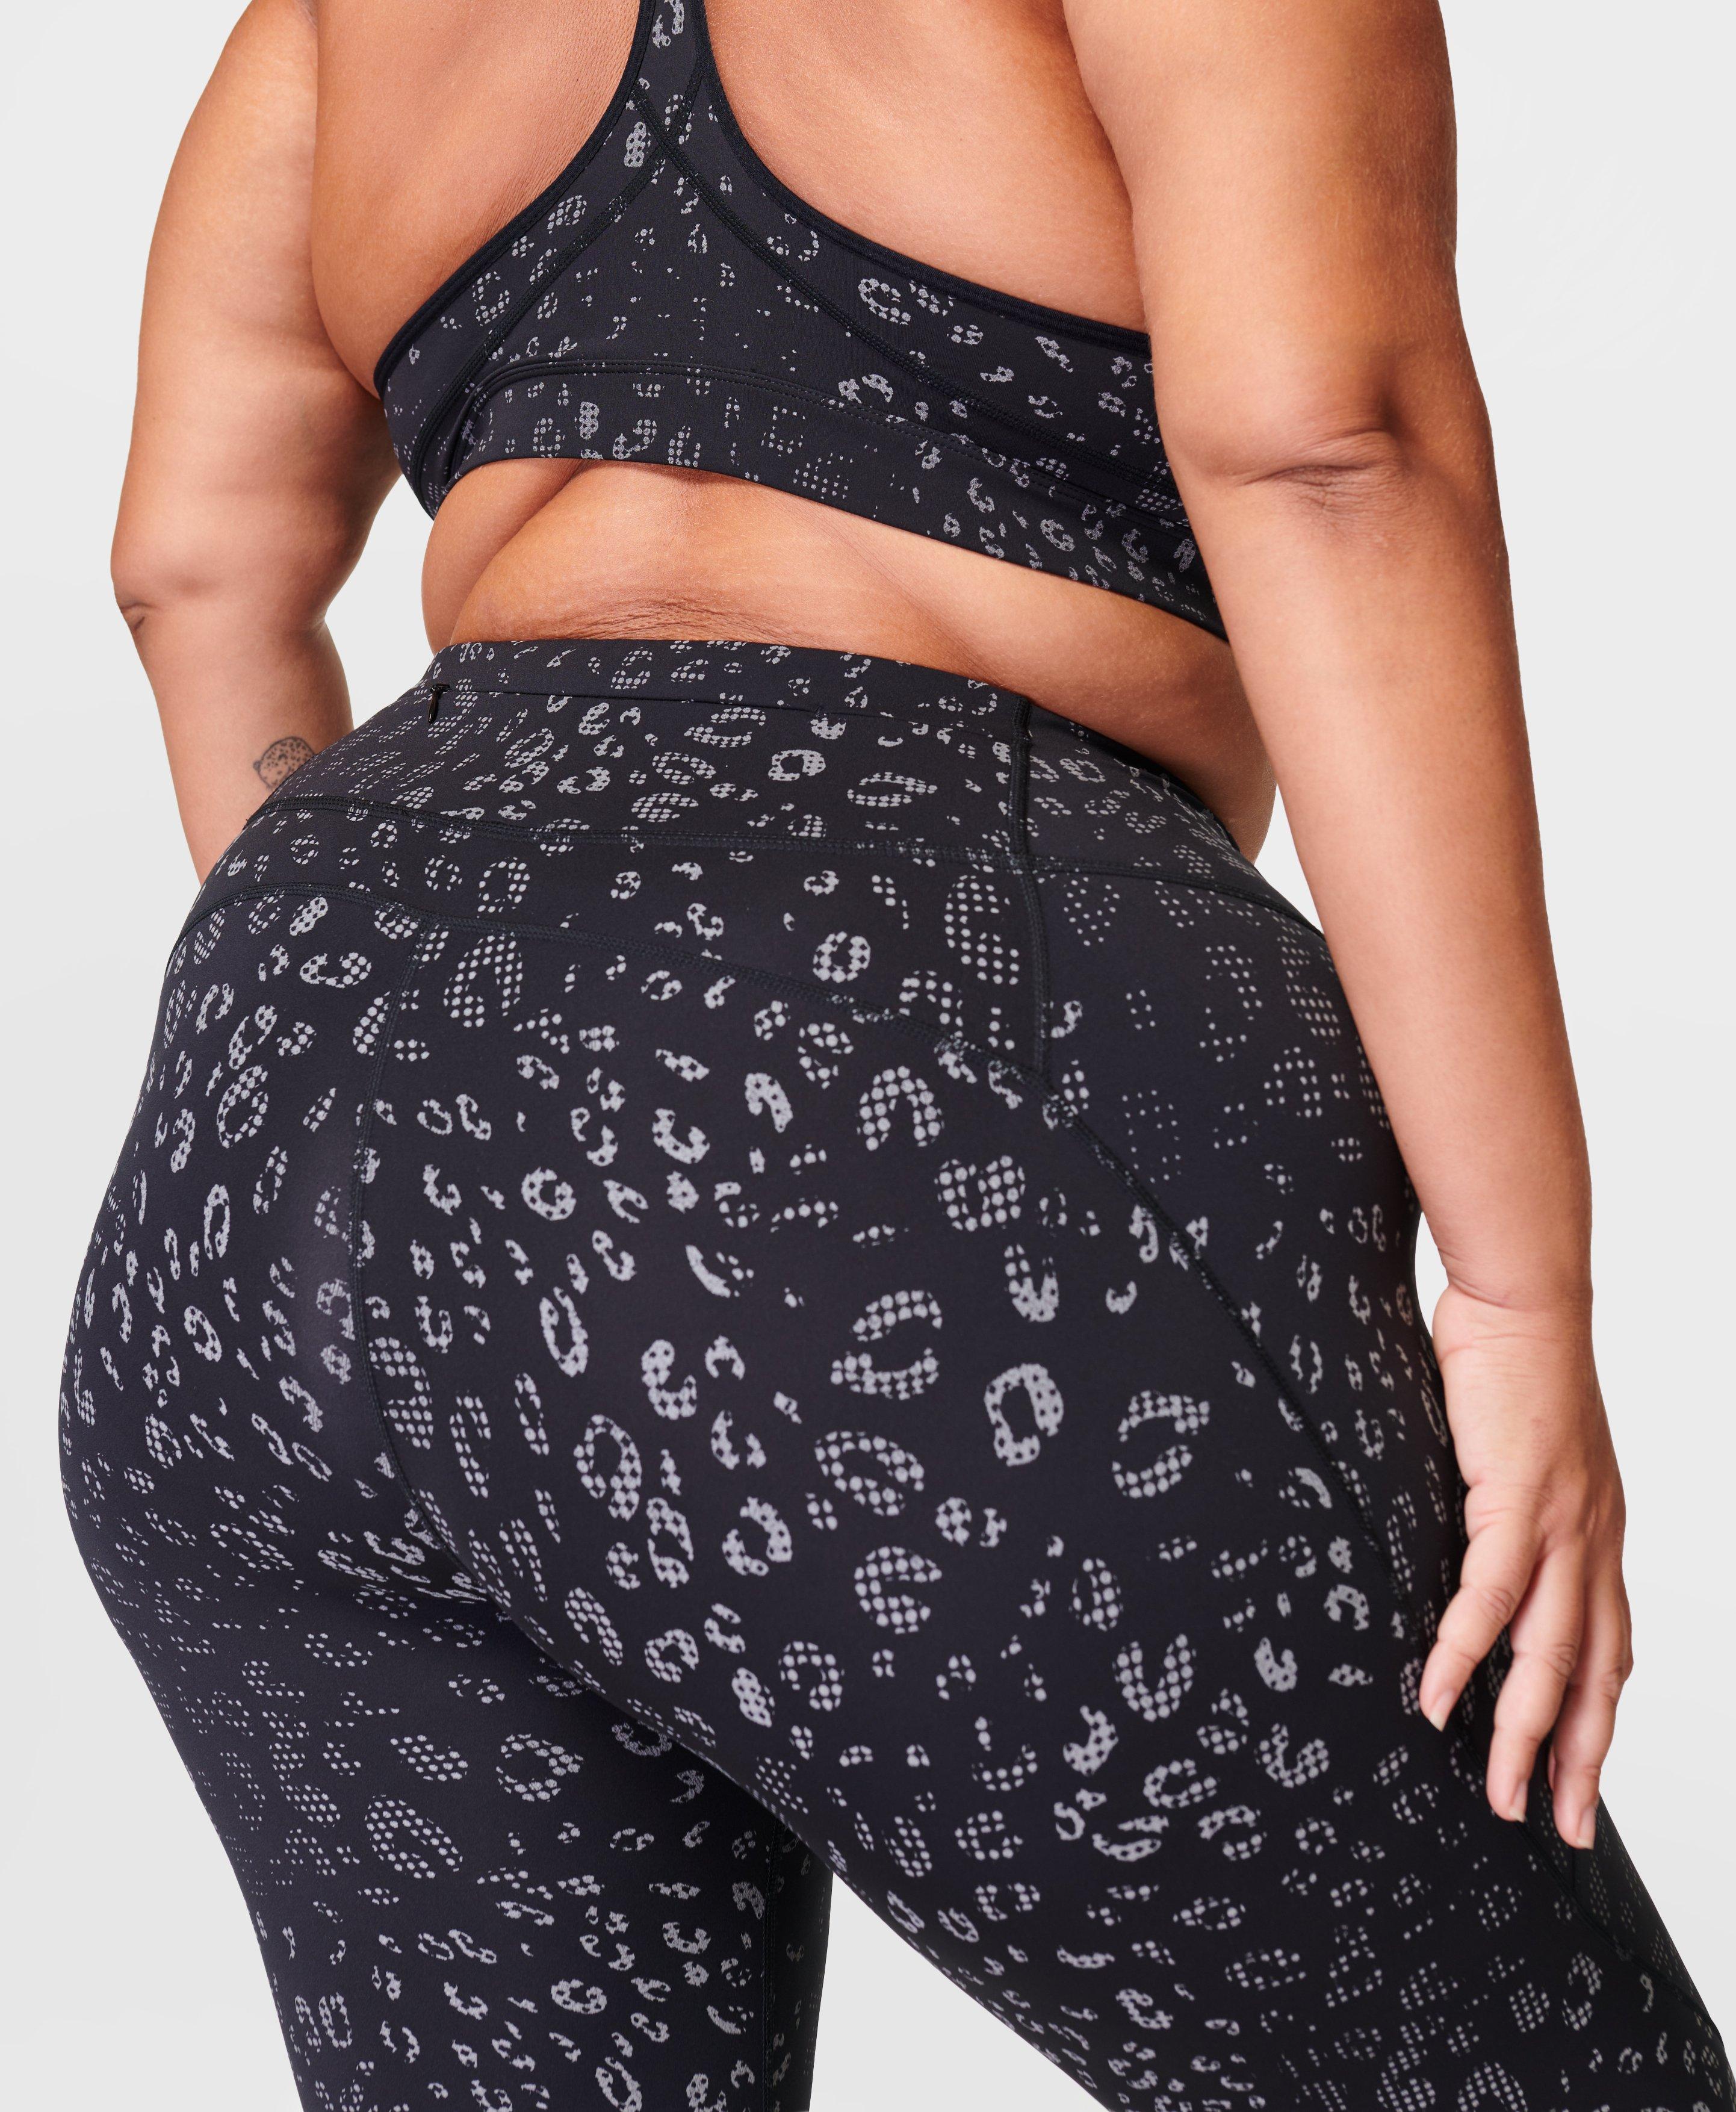 Activewear Yoga Pants 7/8 Lenght Leopard Print with Sheer Mesh